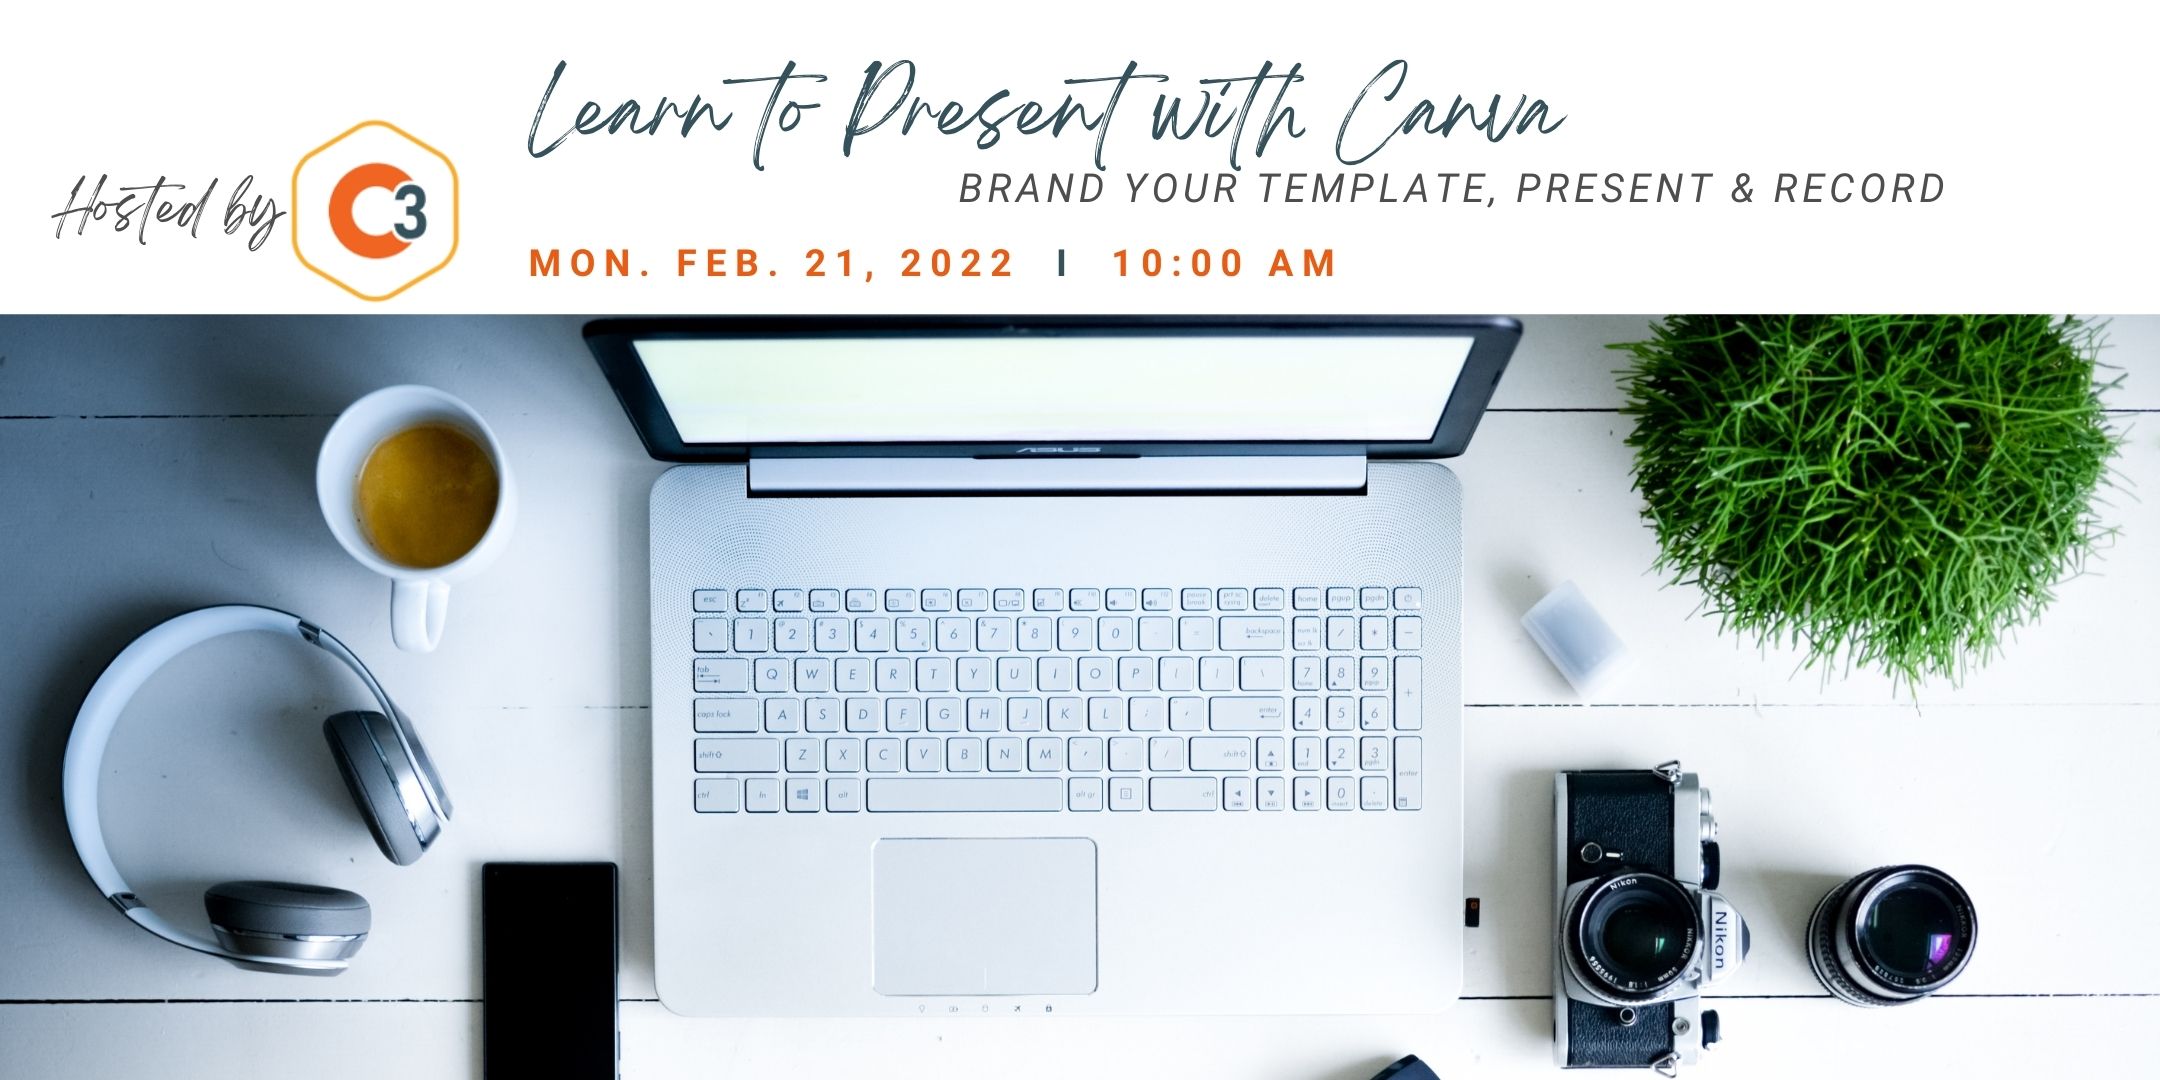 Learn to Present with Canva